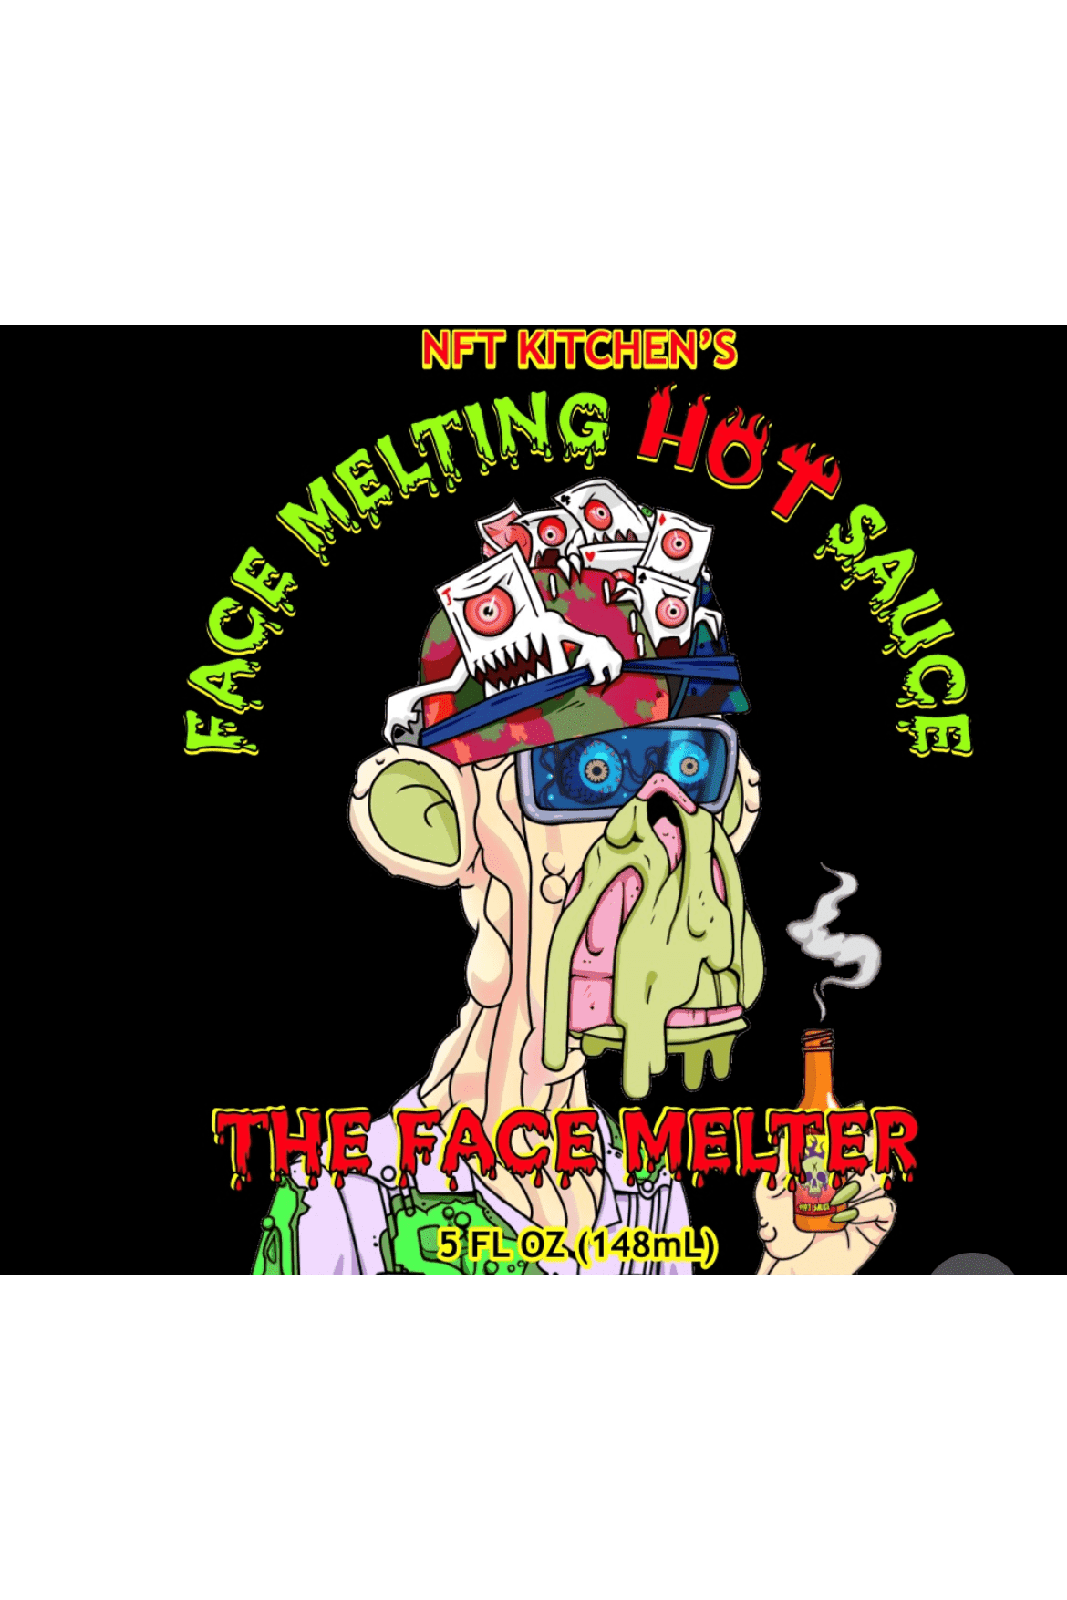 THE FACE MELTER 5oz LIMITED EDITION WHITE LABEL